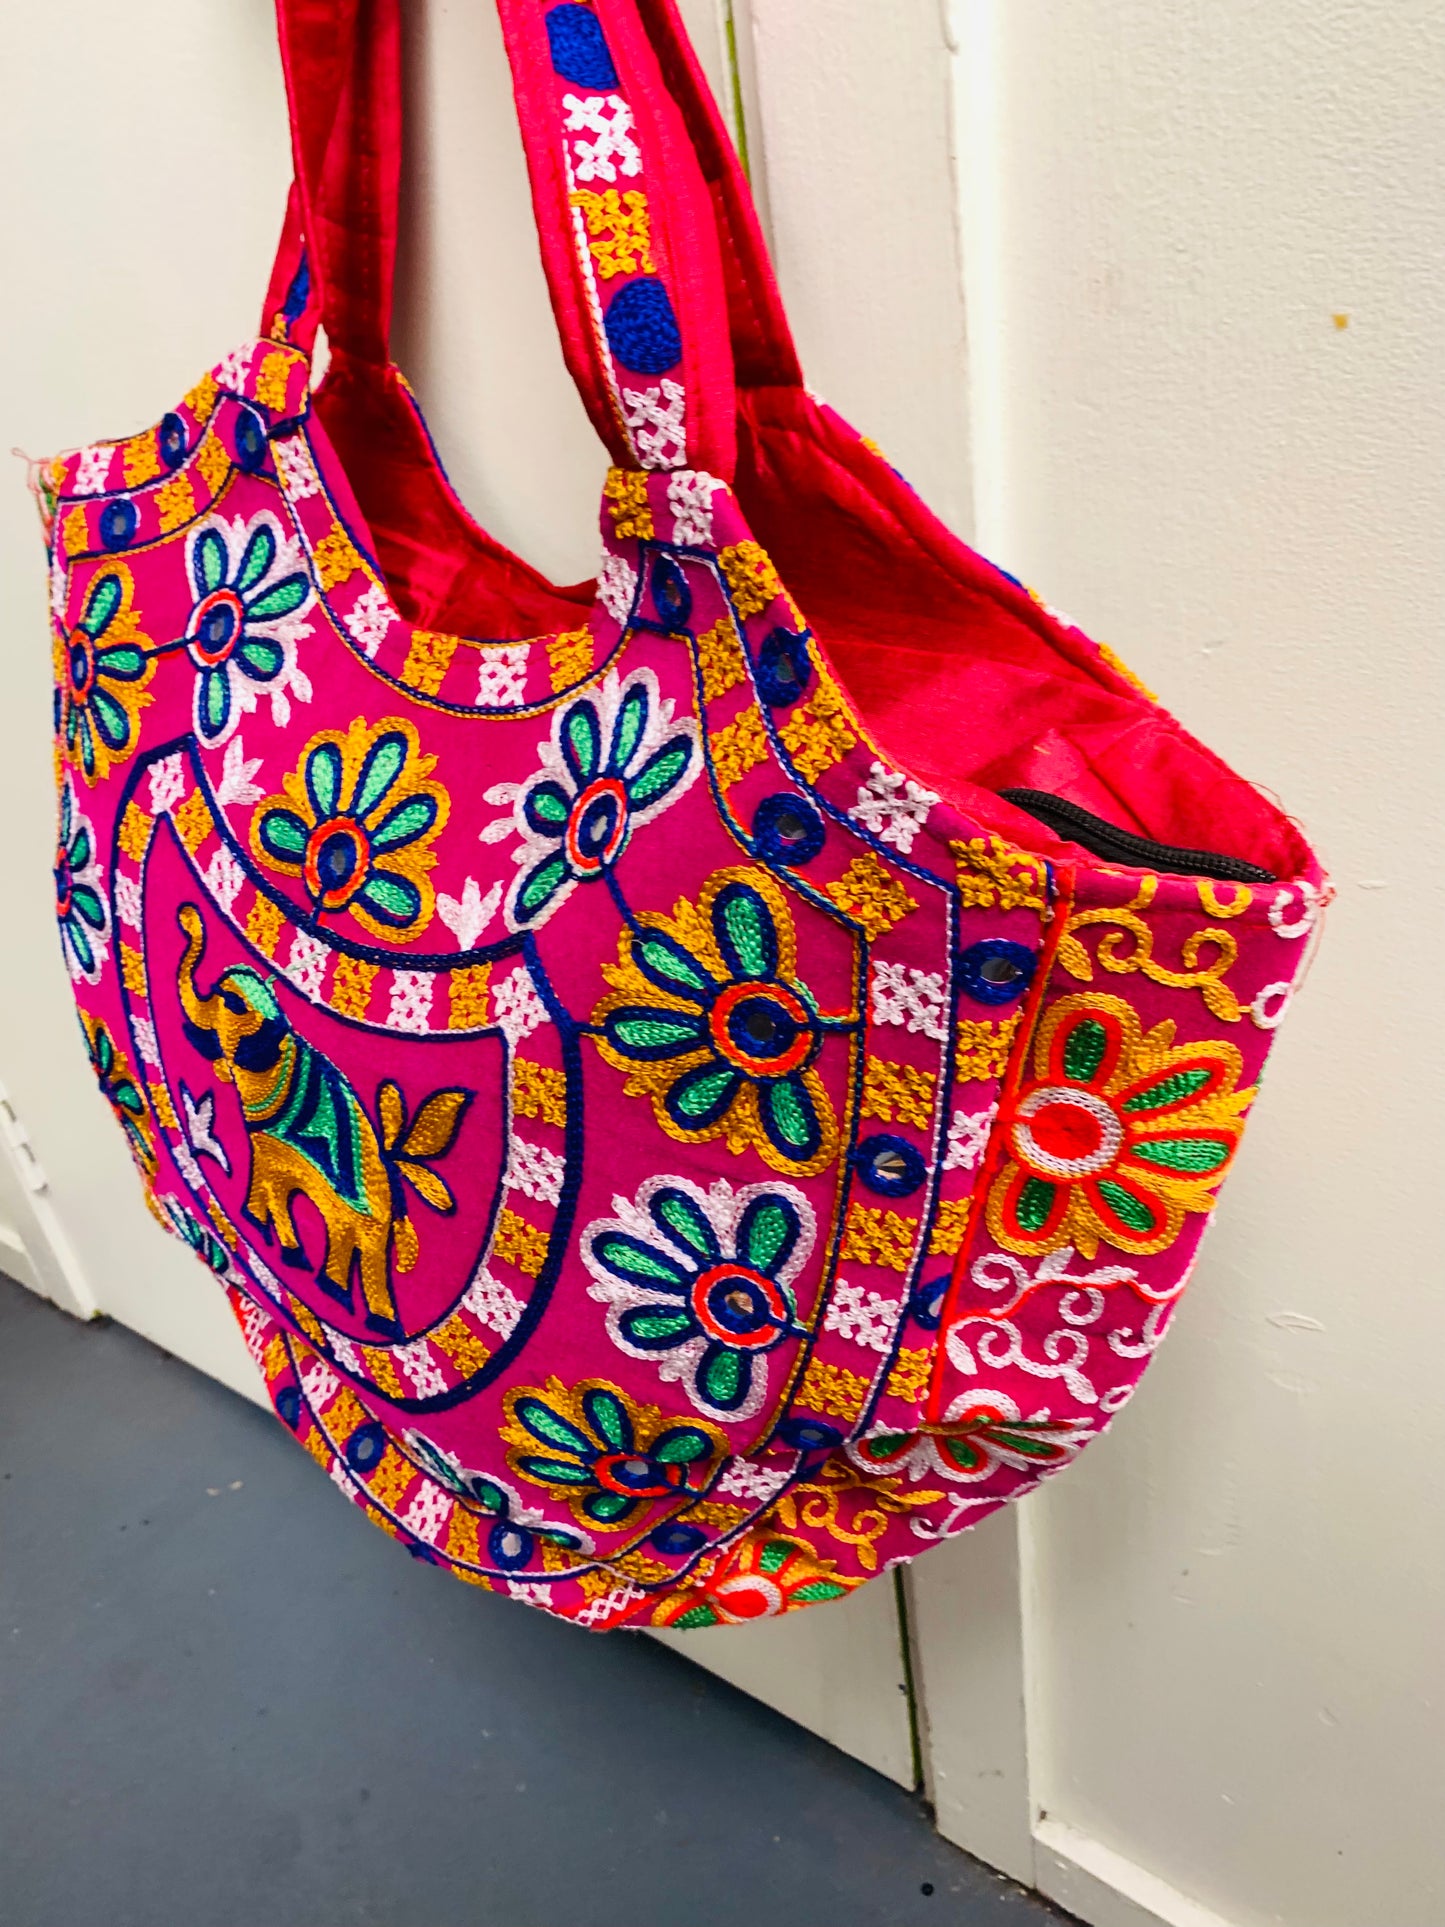 BOHEMIAN STYLE HANDCRAFTED ETHNIC TOTE BAGS